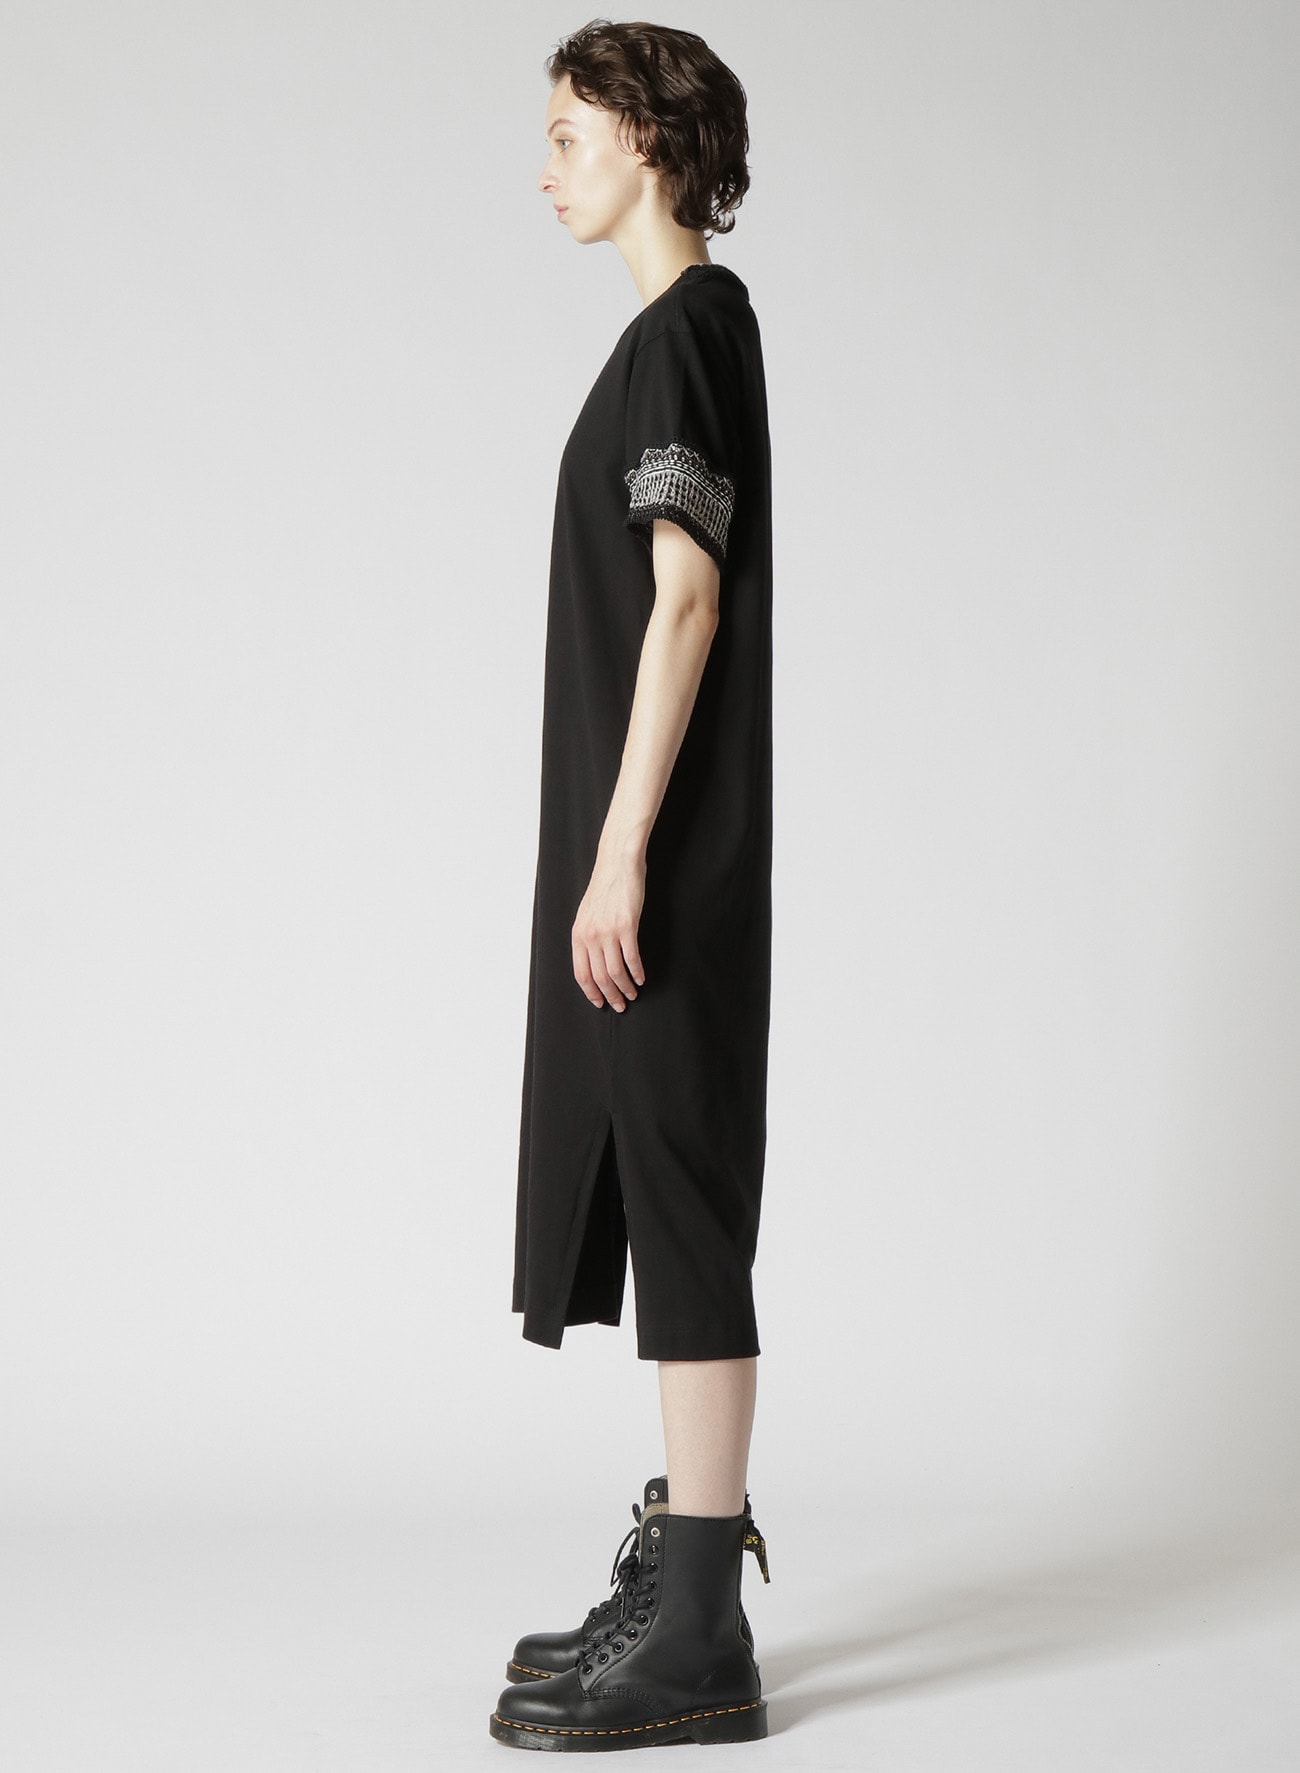 JERSEY AND NATIVE JACQUARD KNIT ATTACHED LONG ONEPIECE